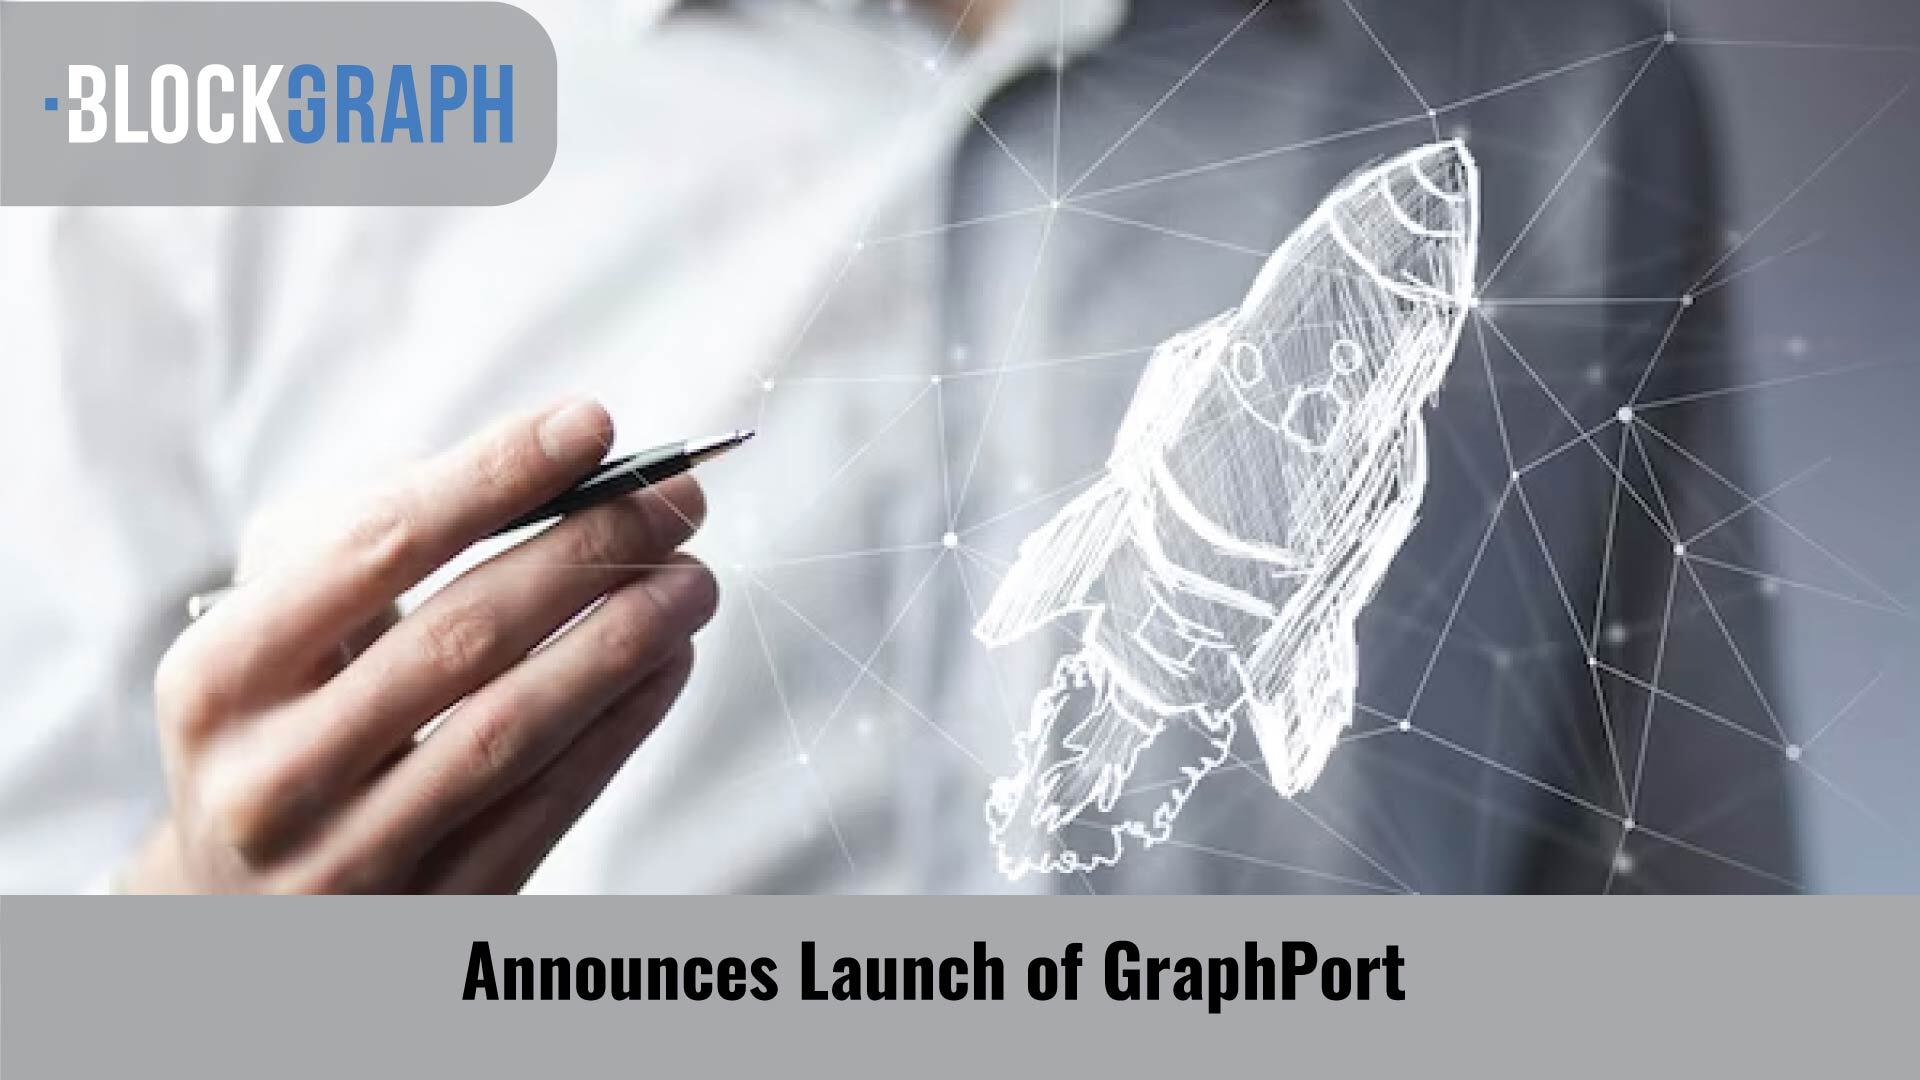 Blockgraph Announces Launch of GraphPort, Enabling Companies Without First-Party Identity Data to Achieve Accurate Data Matching and Targeting for All TV Advertising